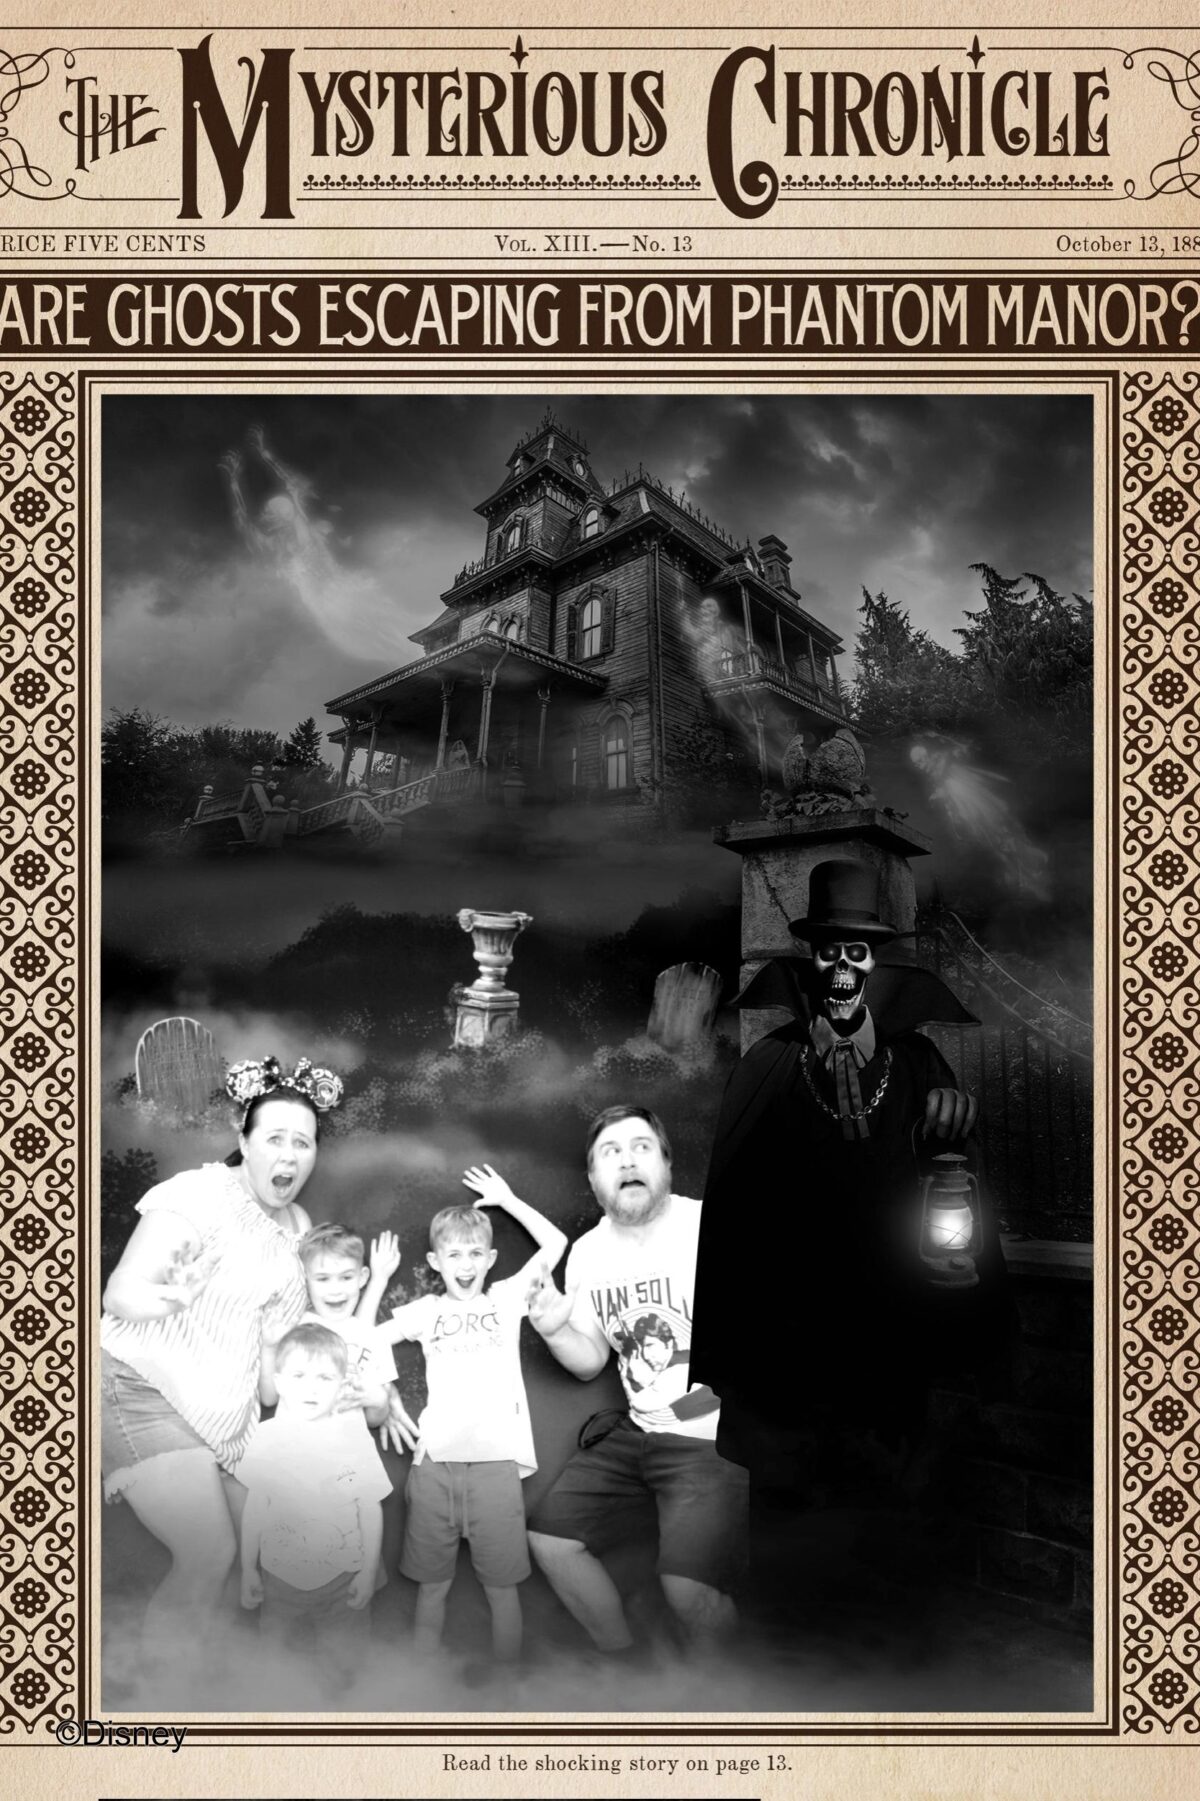 Image shows our personalised copy of the Mysterious Chronicle Newspaper Poster from Disneyland Paris Spirit Photography Booth where you can print a personalised copy of the Mysterious Chronicle by Phantom Manor as a Disney souvenir. Image by Keep Up With The Jones Family.